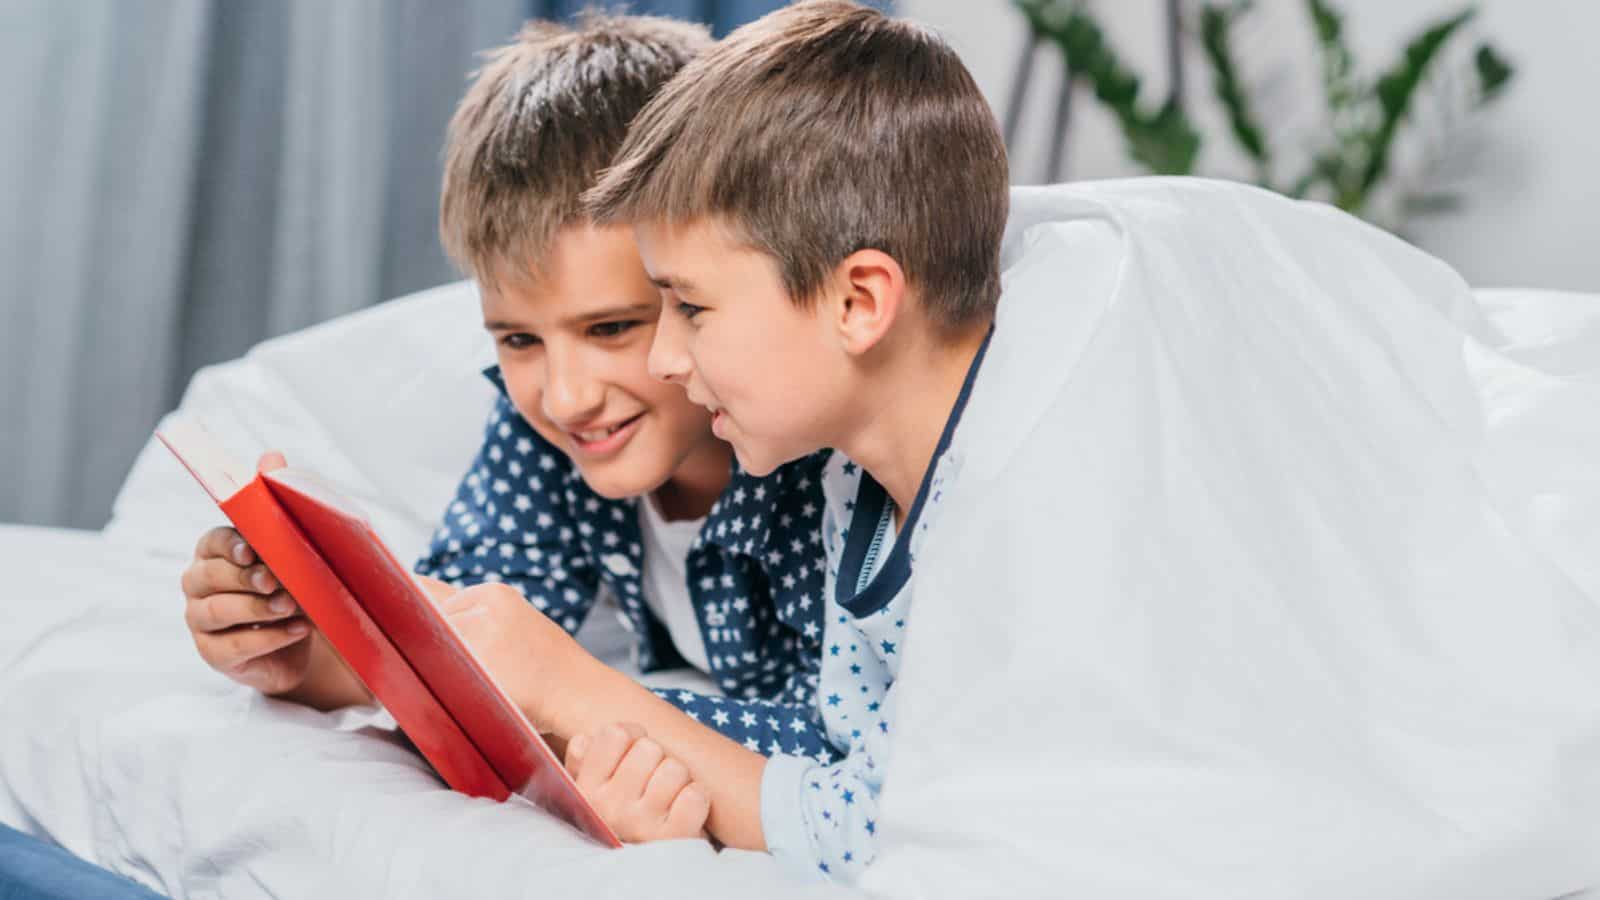 Boys reading book together